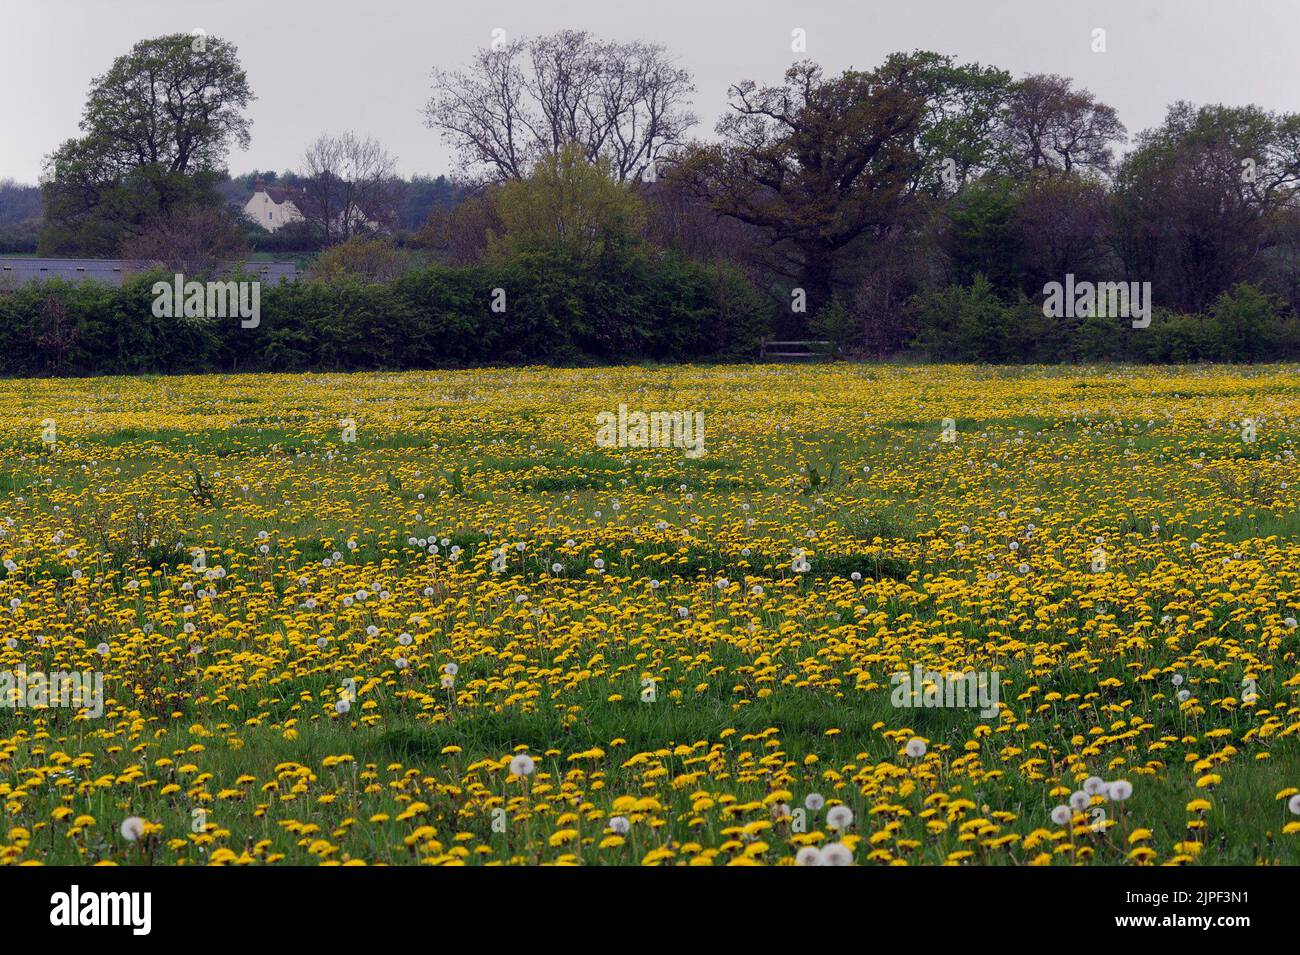 WARM SPRING TEMPERATURES AND LONG SPELLS OF SUNSHINE ARE CAUSING DANDELIONS AND DAISIES TO BLOOM IN HUGE NUMBERS ACROSS HAMPSHIRE A YELLOW CARPET OF DANDELIONS IN A FIELD AT HAMBLEDON  PIC MIKE WALKER, MIKE WALKER PICTURES, 125 THE KEEP, PORTCHESTER, HANTS PO16 9PR TEL. 07747012287 e.mail. walker.mike@ntlworld.com Stock Photo